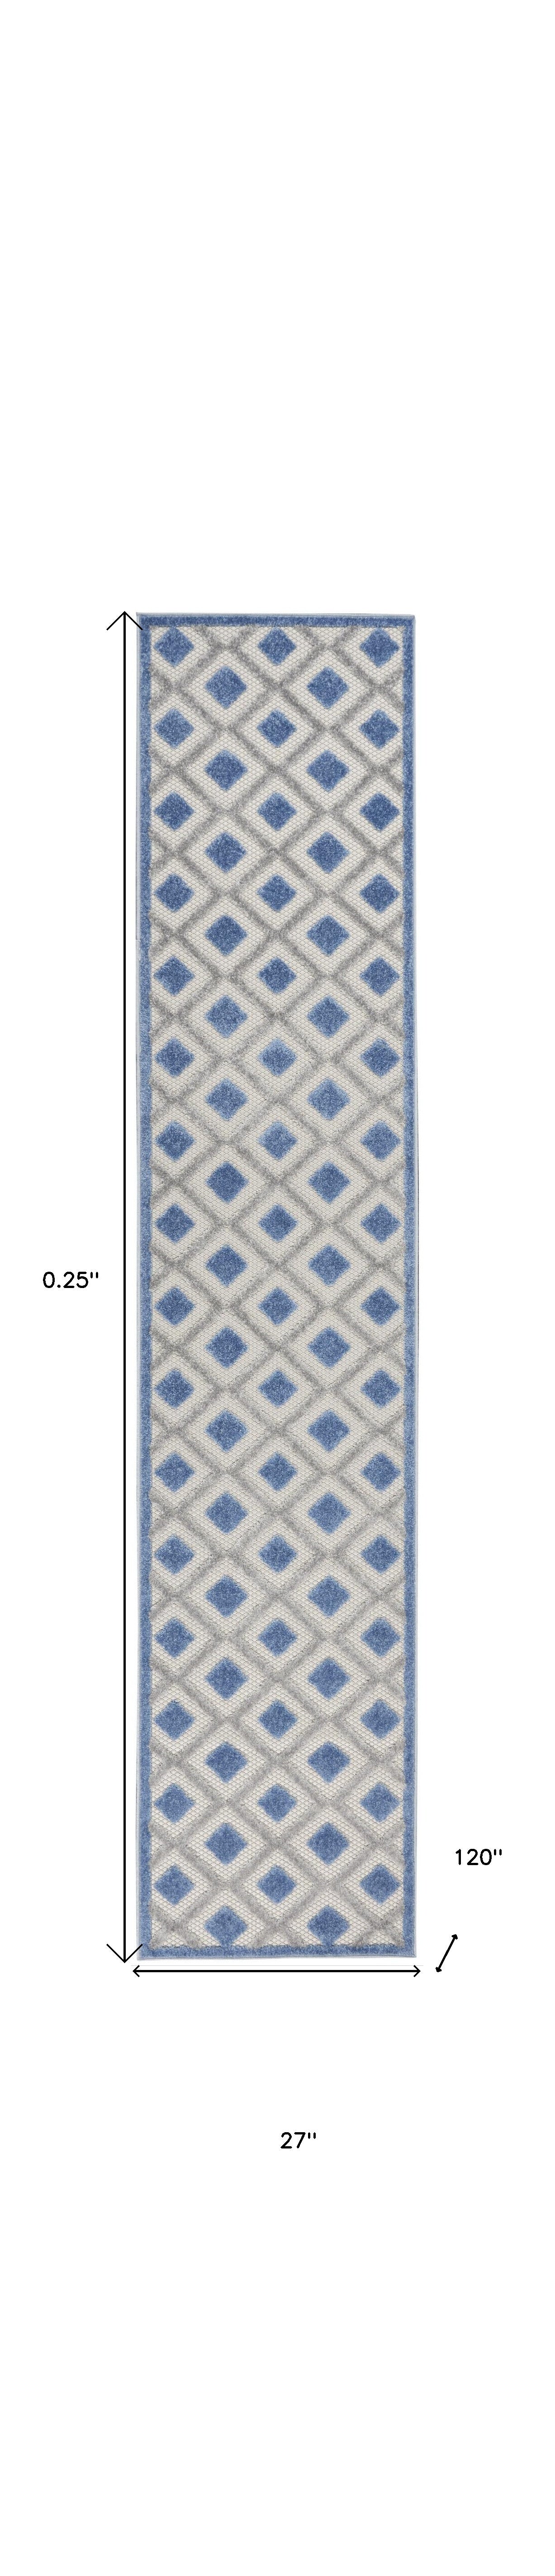 Blue And Grey Gingham Non Skid Indoor Outdoor Runner Rug - 2' X 10'